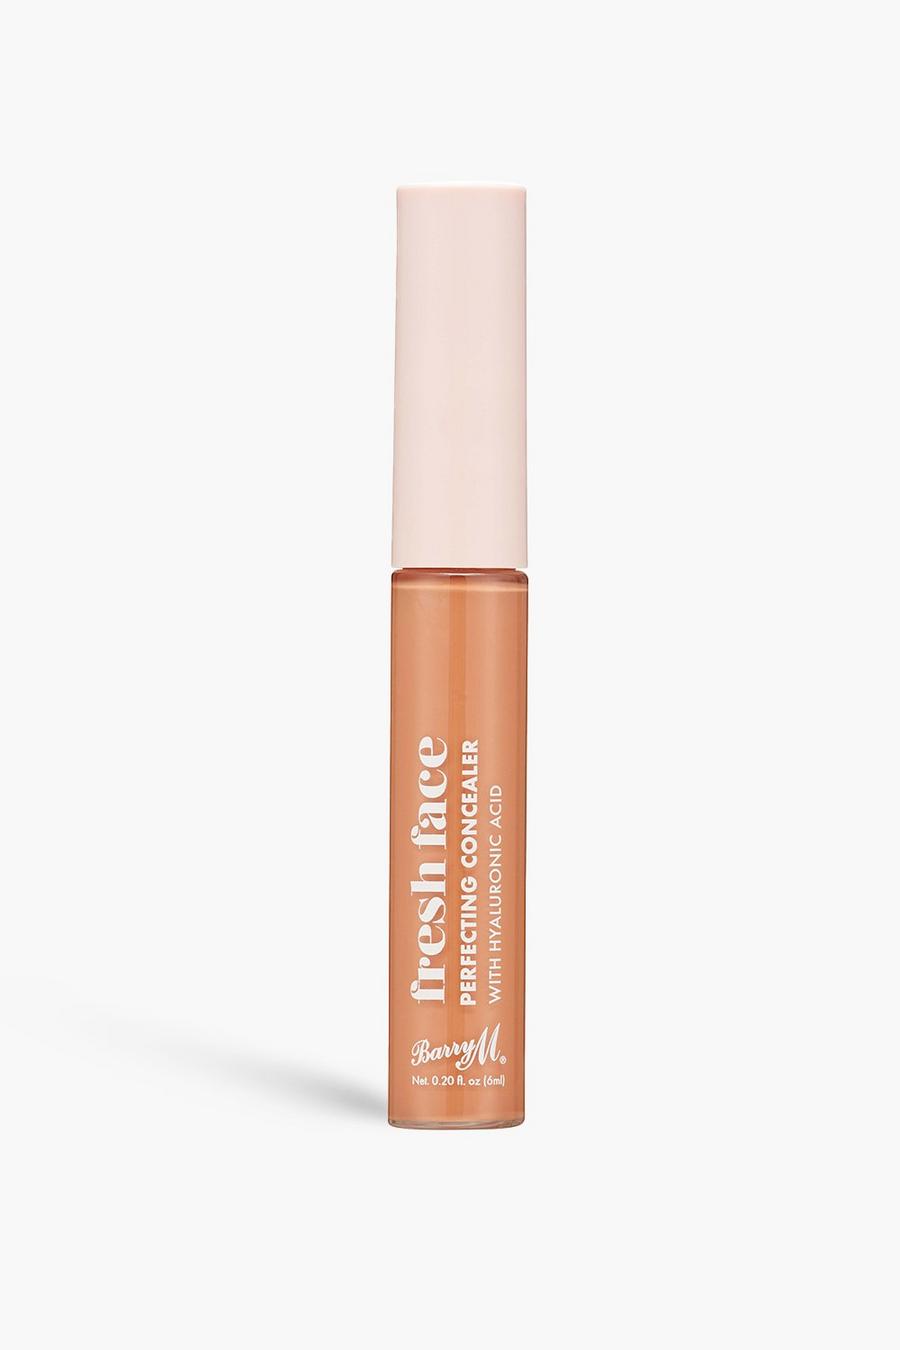 Tan marron Barry M Fresh Face Perfecting Concealer 8